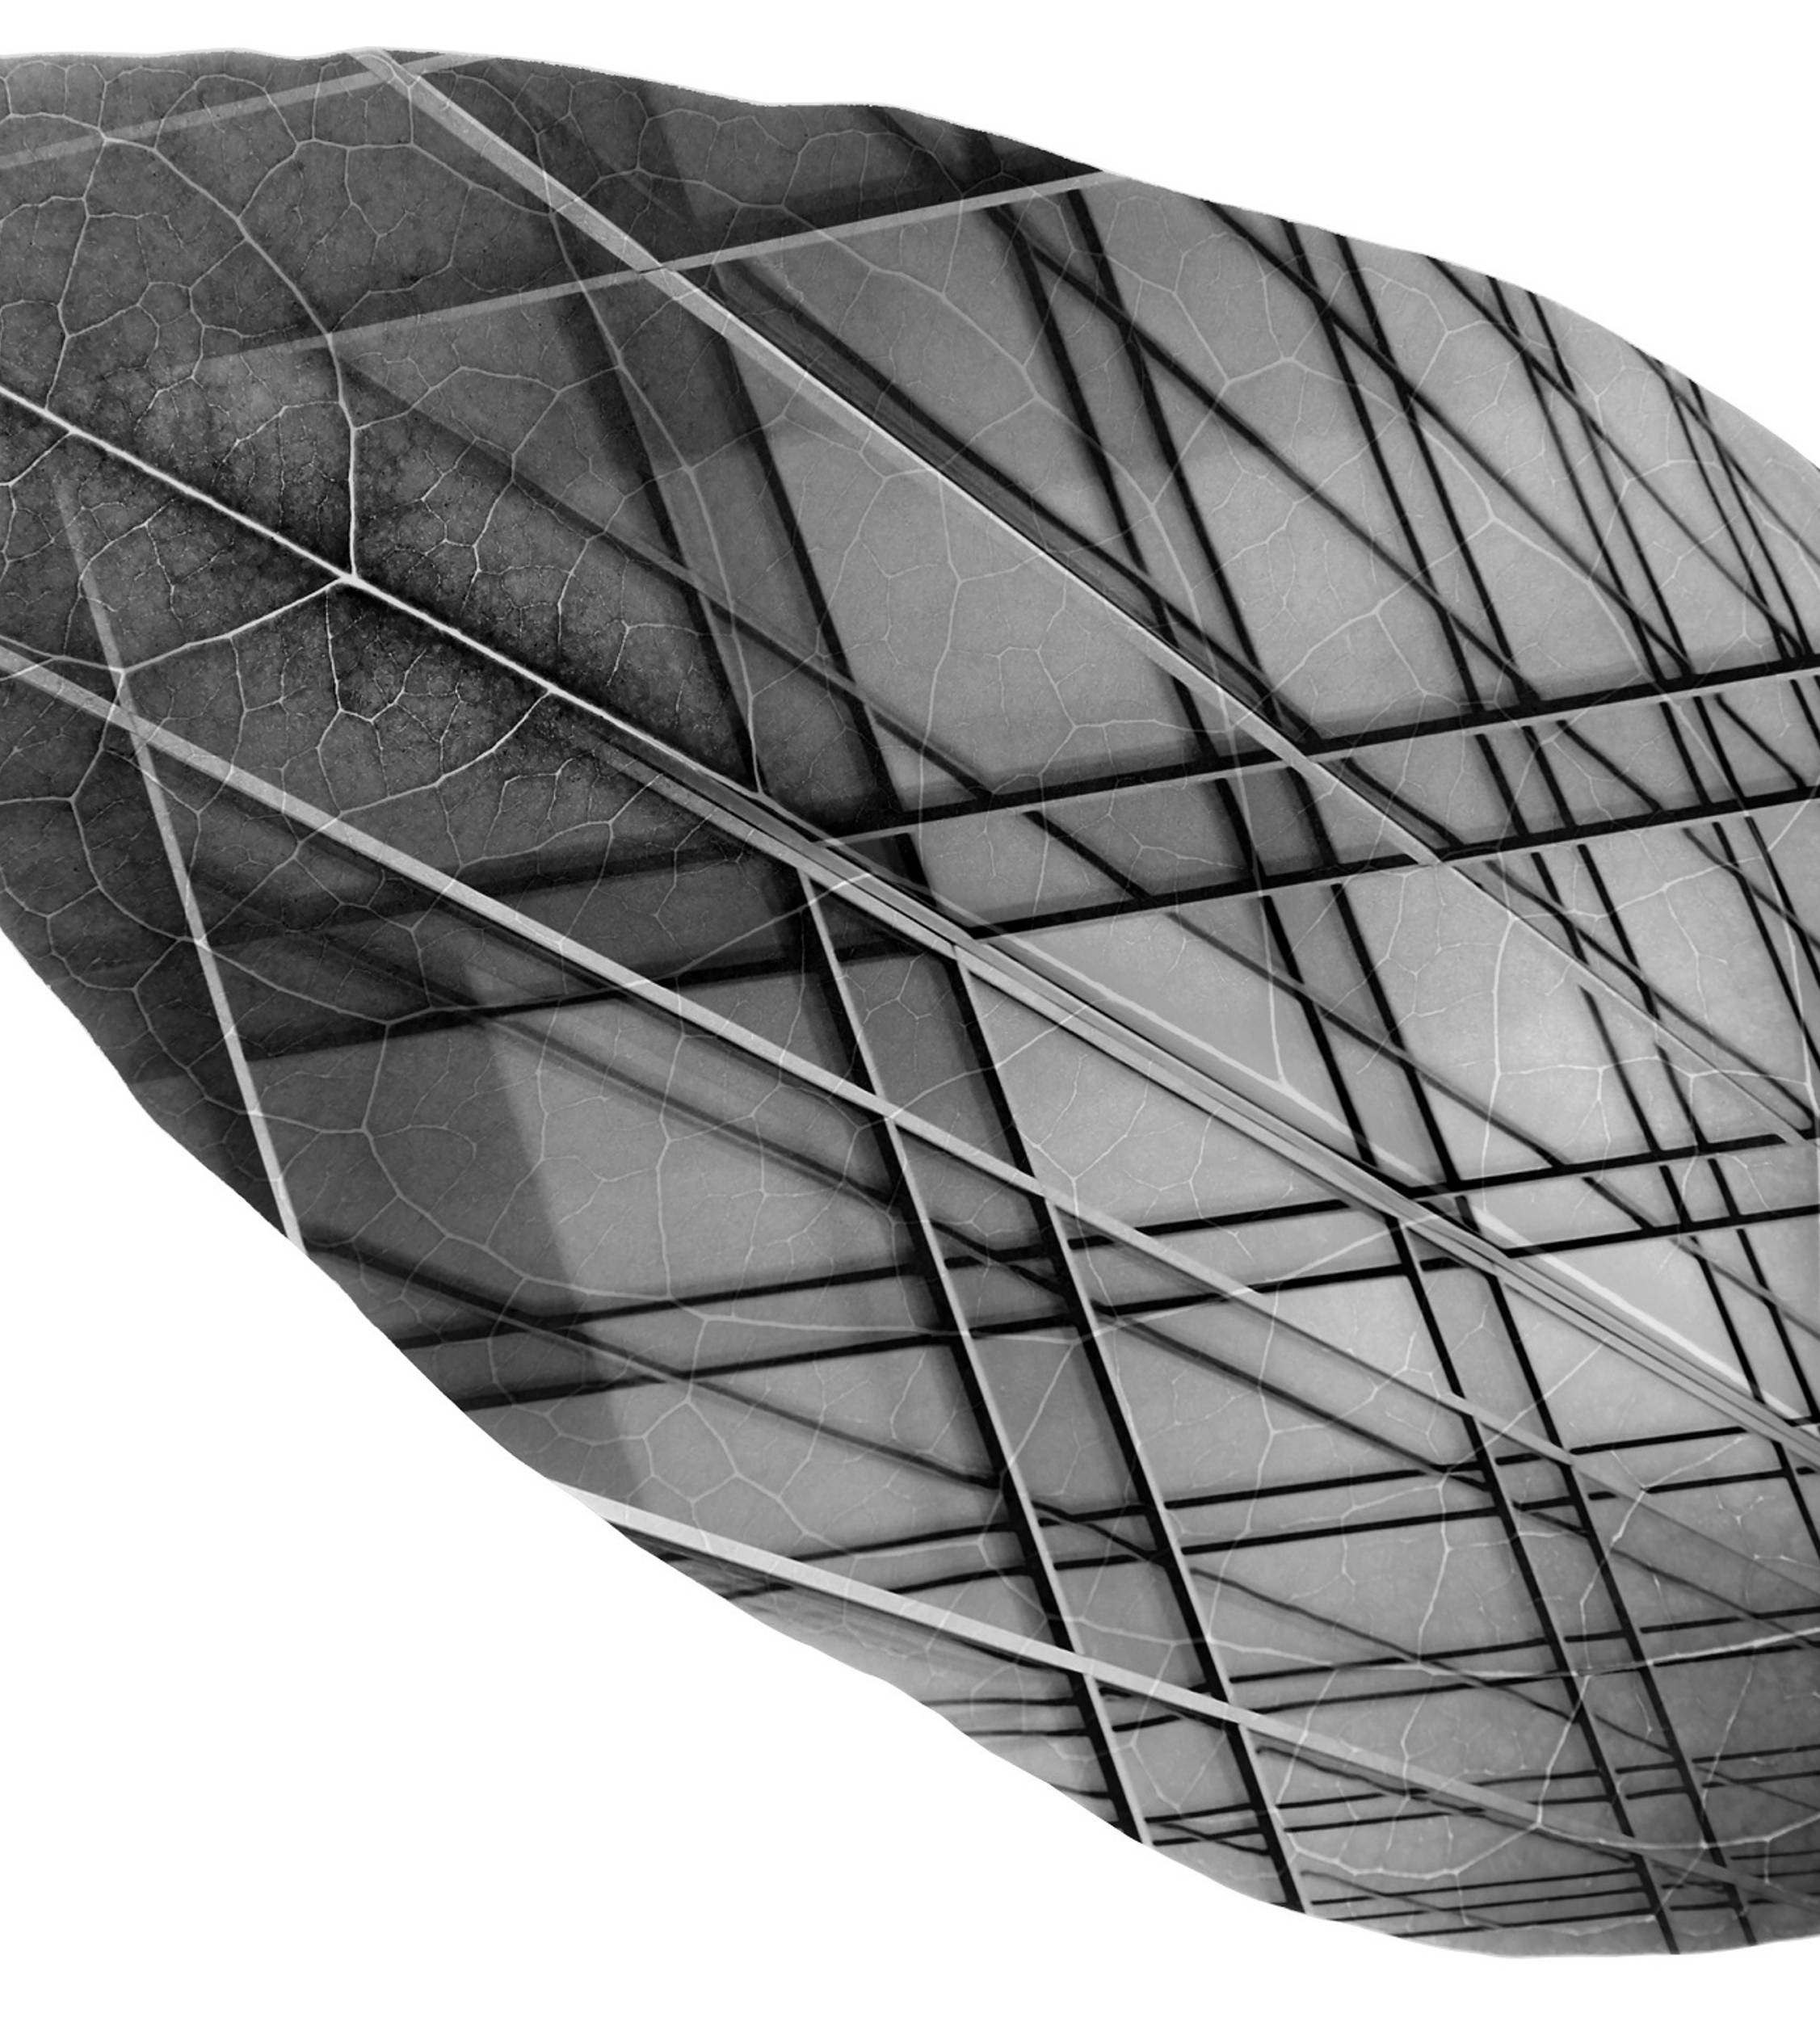 Steel structure in leaf shape